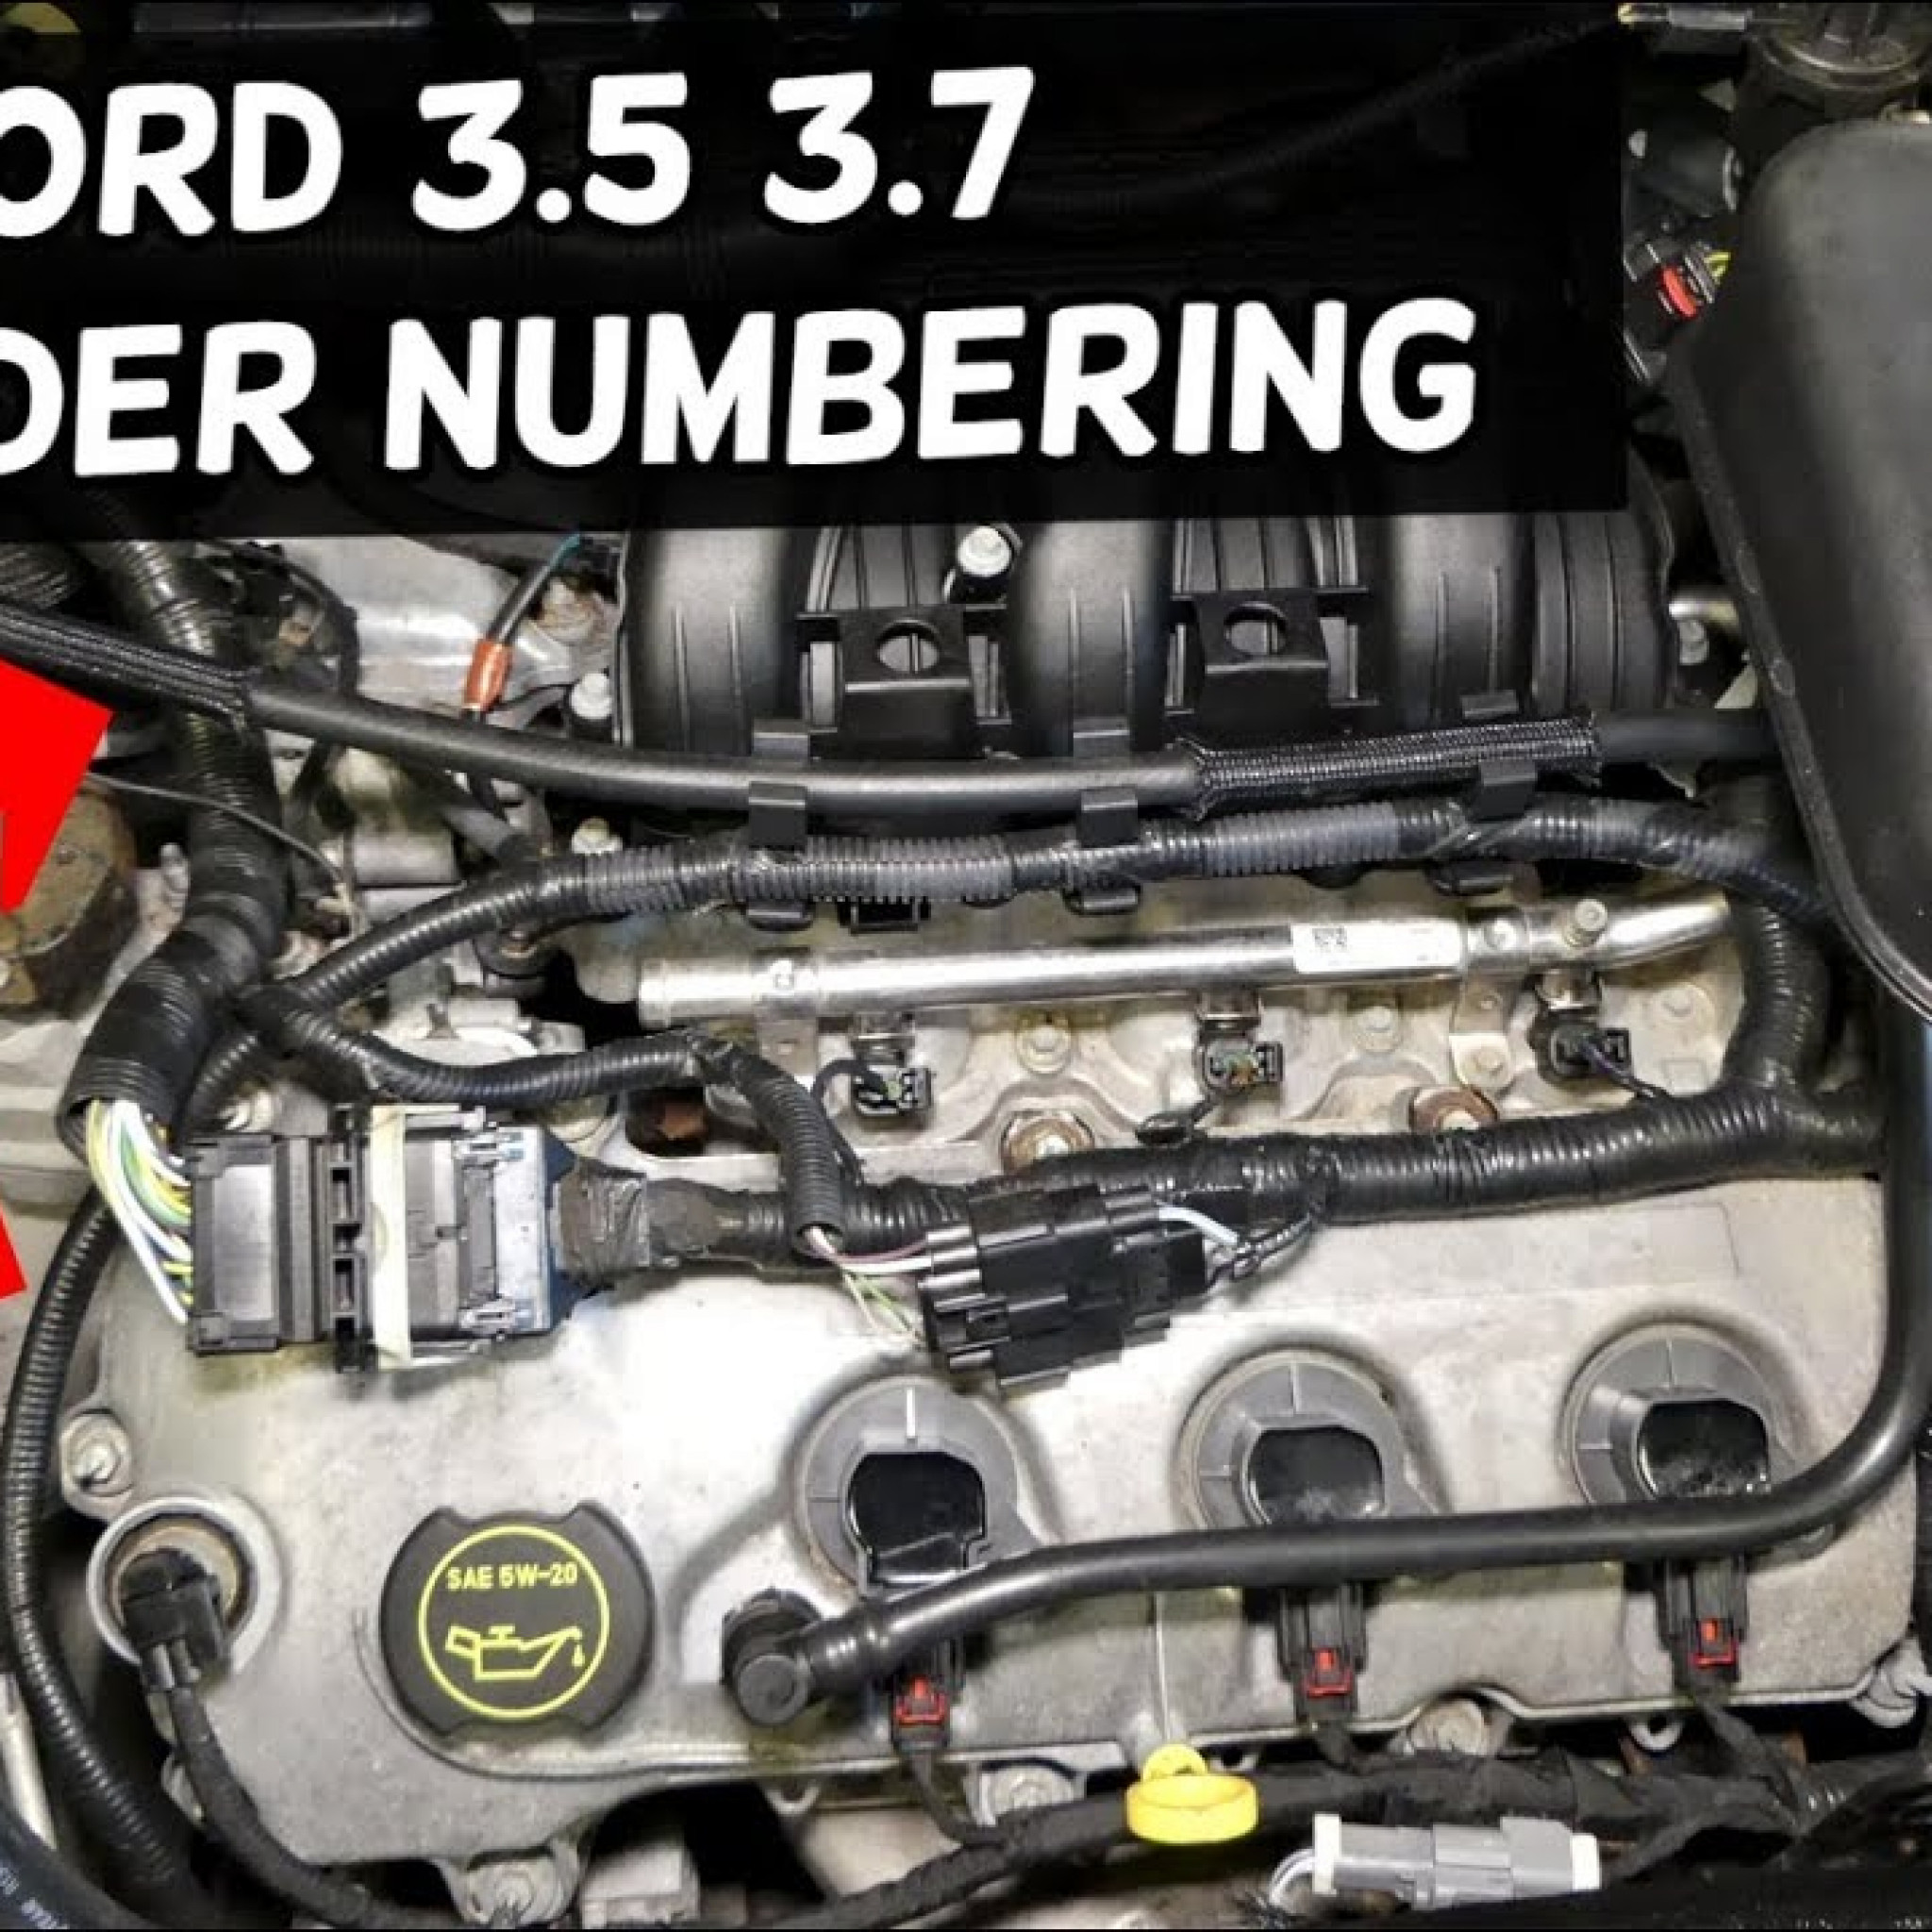 2008 Ford Taurus 3.5 Firing Order | Wiring and Printable